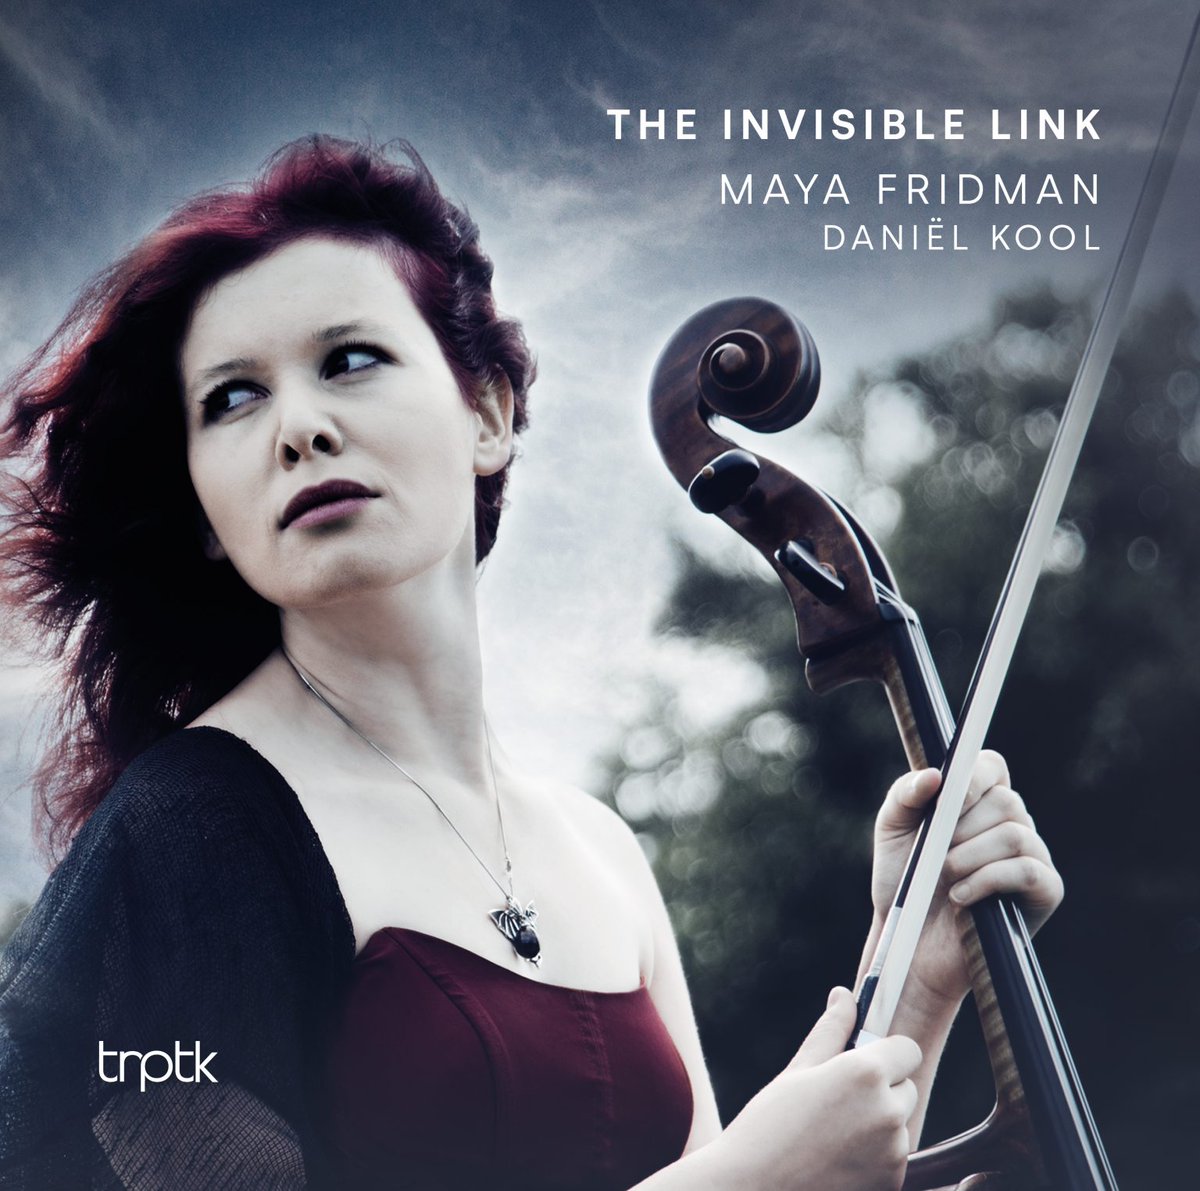 The incredible Maya Fridman surprises again with this amazing recording containing repertoire by composers Pärt, Schnittke and Vasks. Download your AURO-3D copy here!

trptk.com/shop/spatial-a…

#music #classicalmusic #ImmersiveAudio #spatialaudio #classicalcomposers